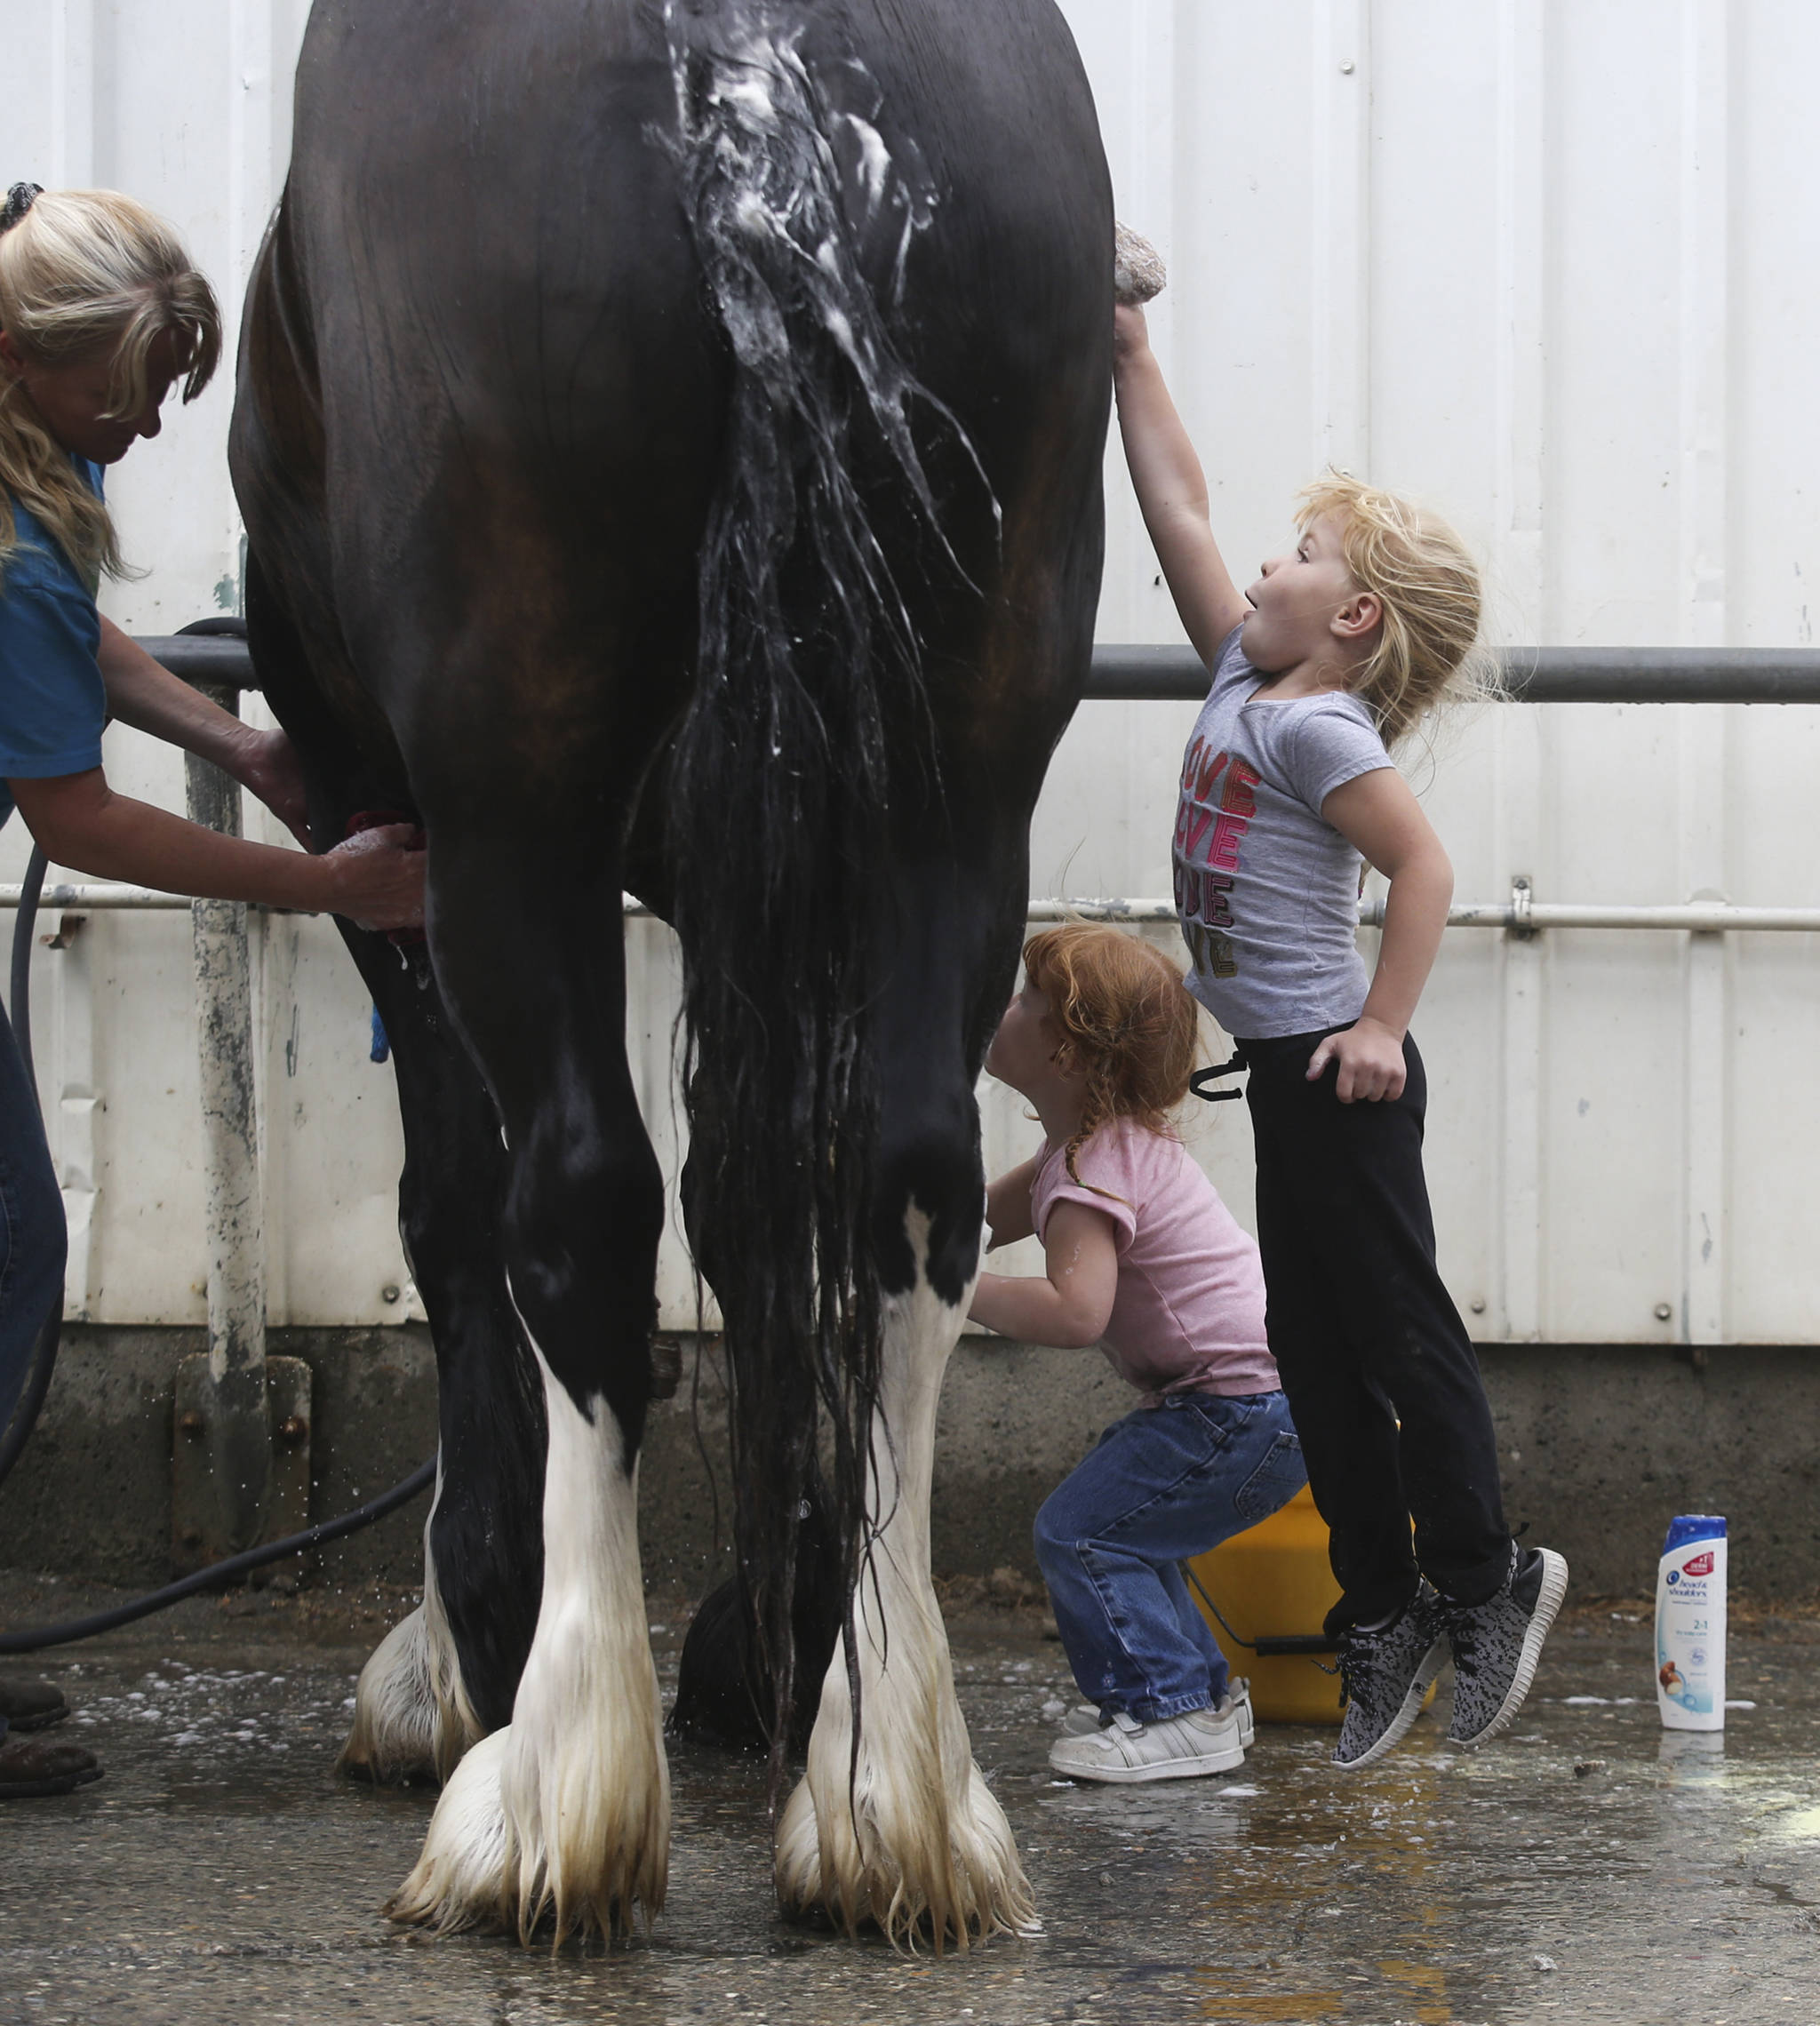 Lillian Lentz, 4, leaps high to help wash a horse during the opening day of the Evergreen State Fair on Aug. 22 in Monroe. (Andy Bronson / The Herald)